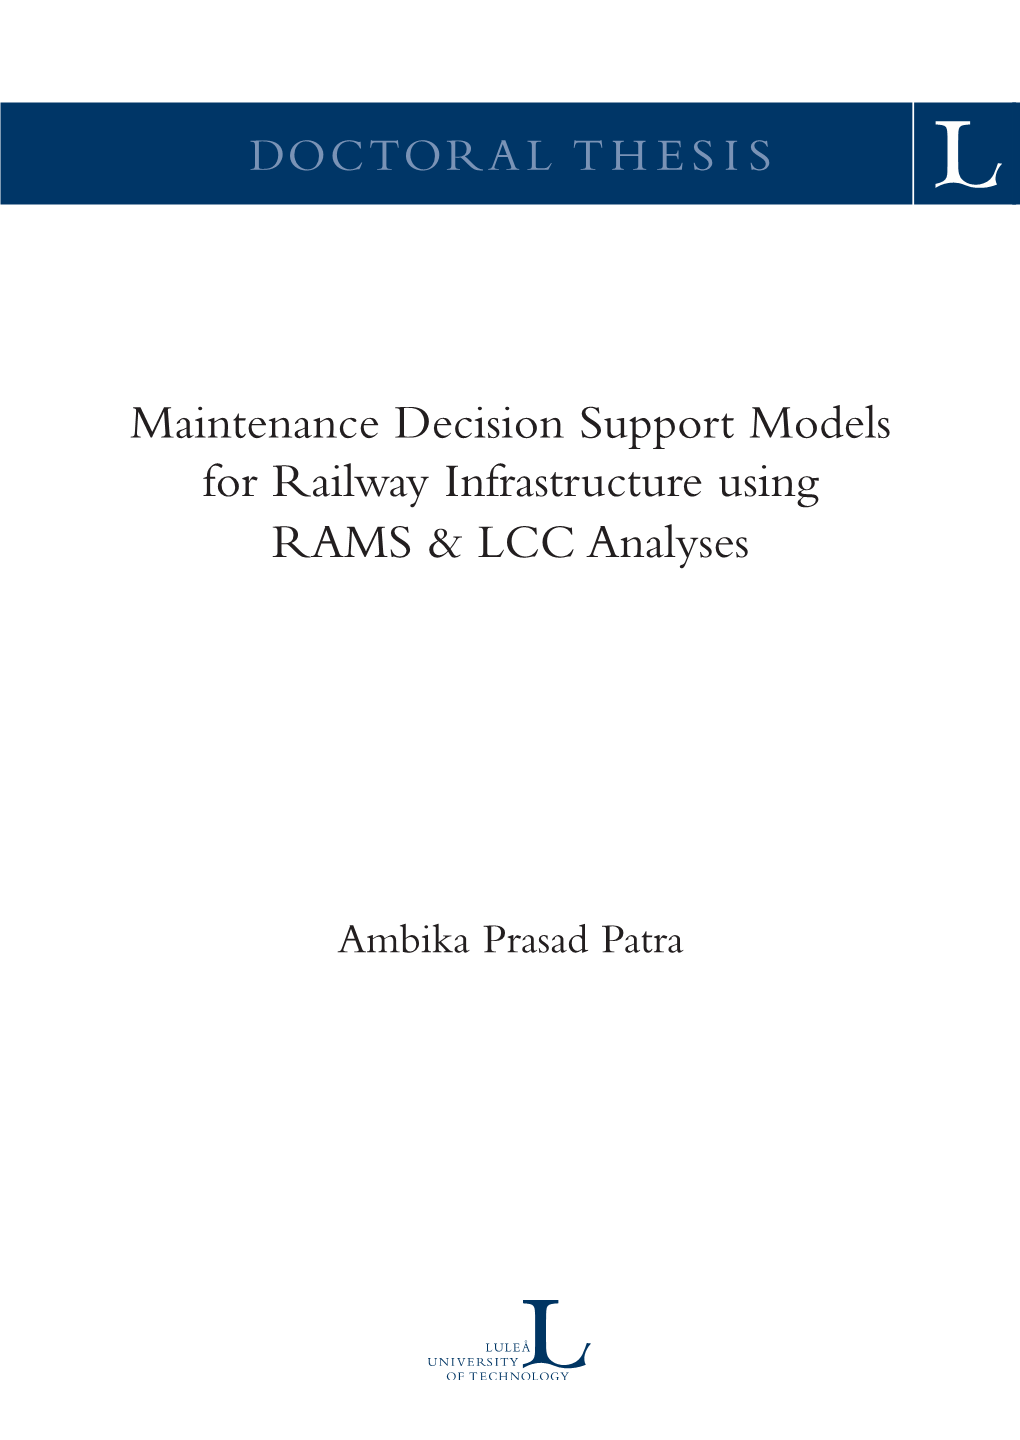 Maintenance Decision Support Models for Railway Infrastructure Using